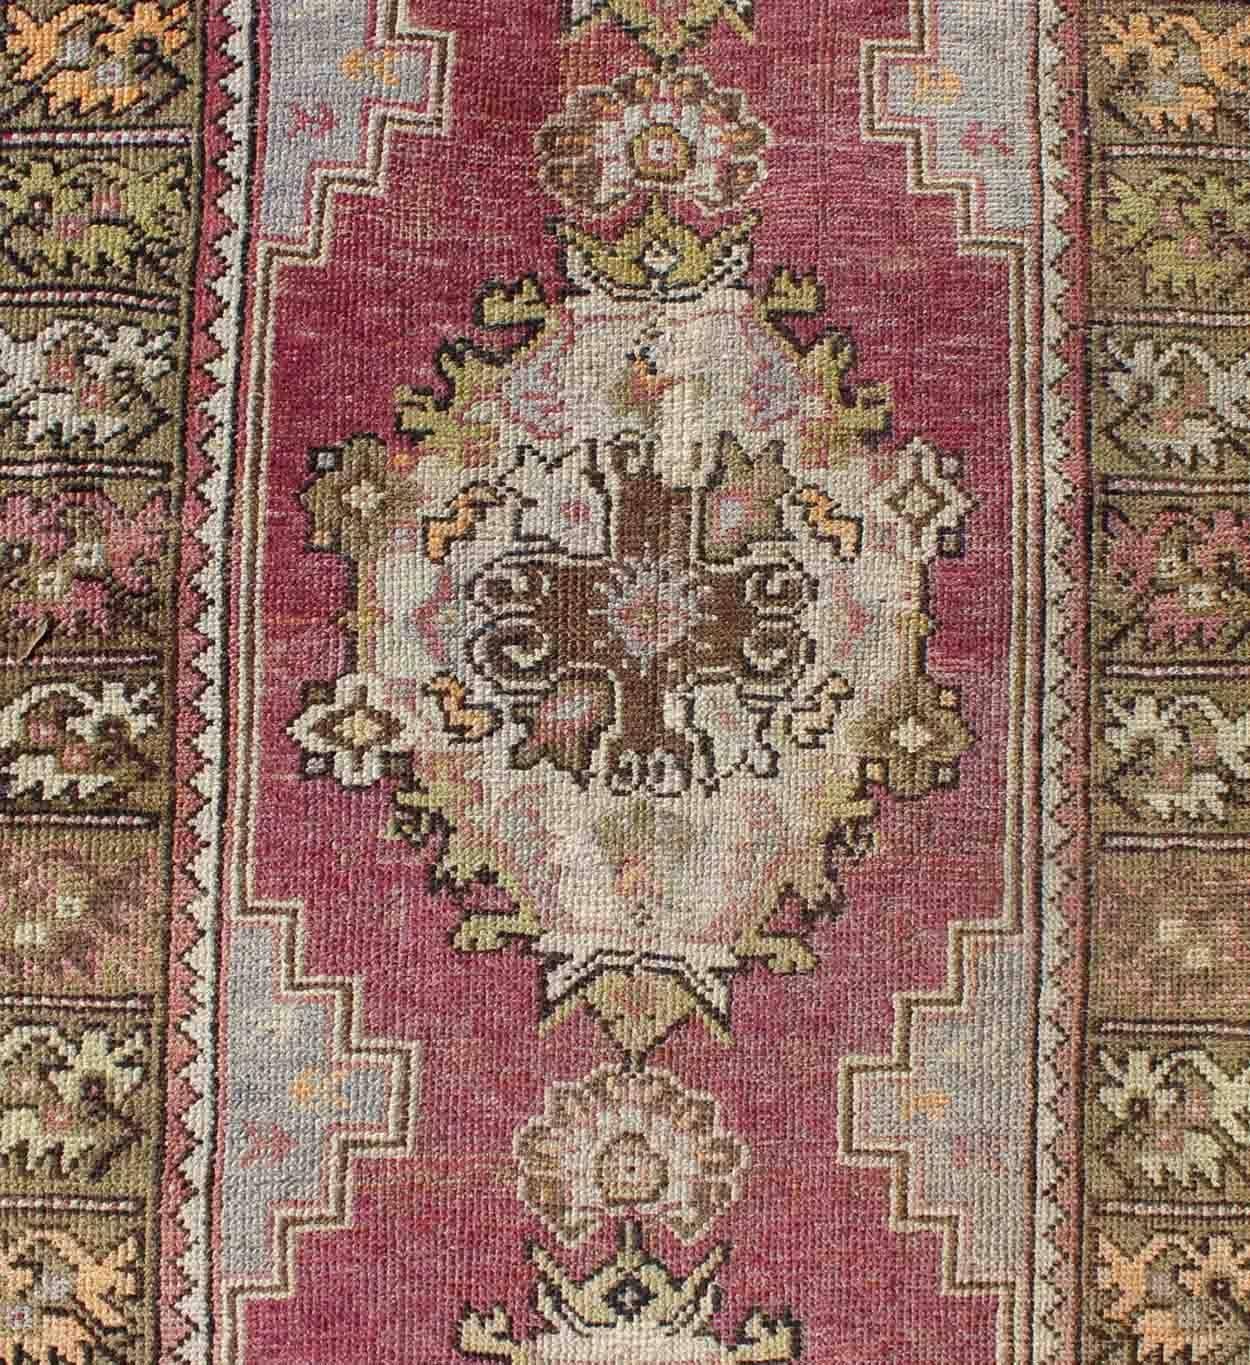 Berry Tri-Medallion Vintage Turkey Oushak Runner with Gray, Camel, Blush Accents In Excellent Condition For Sale In Atlanta, GA